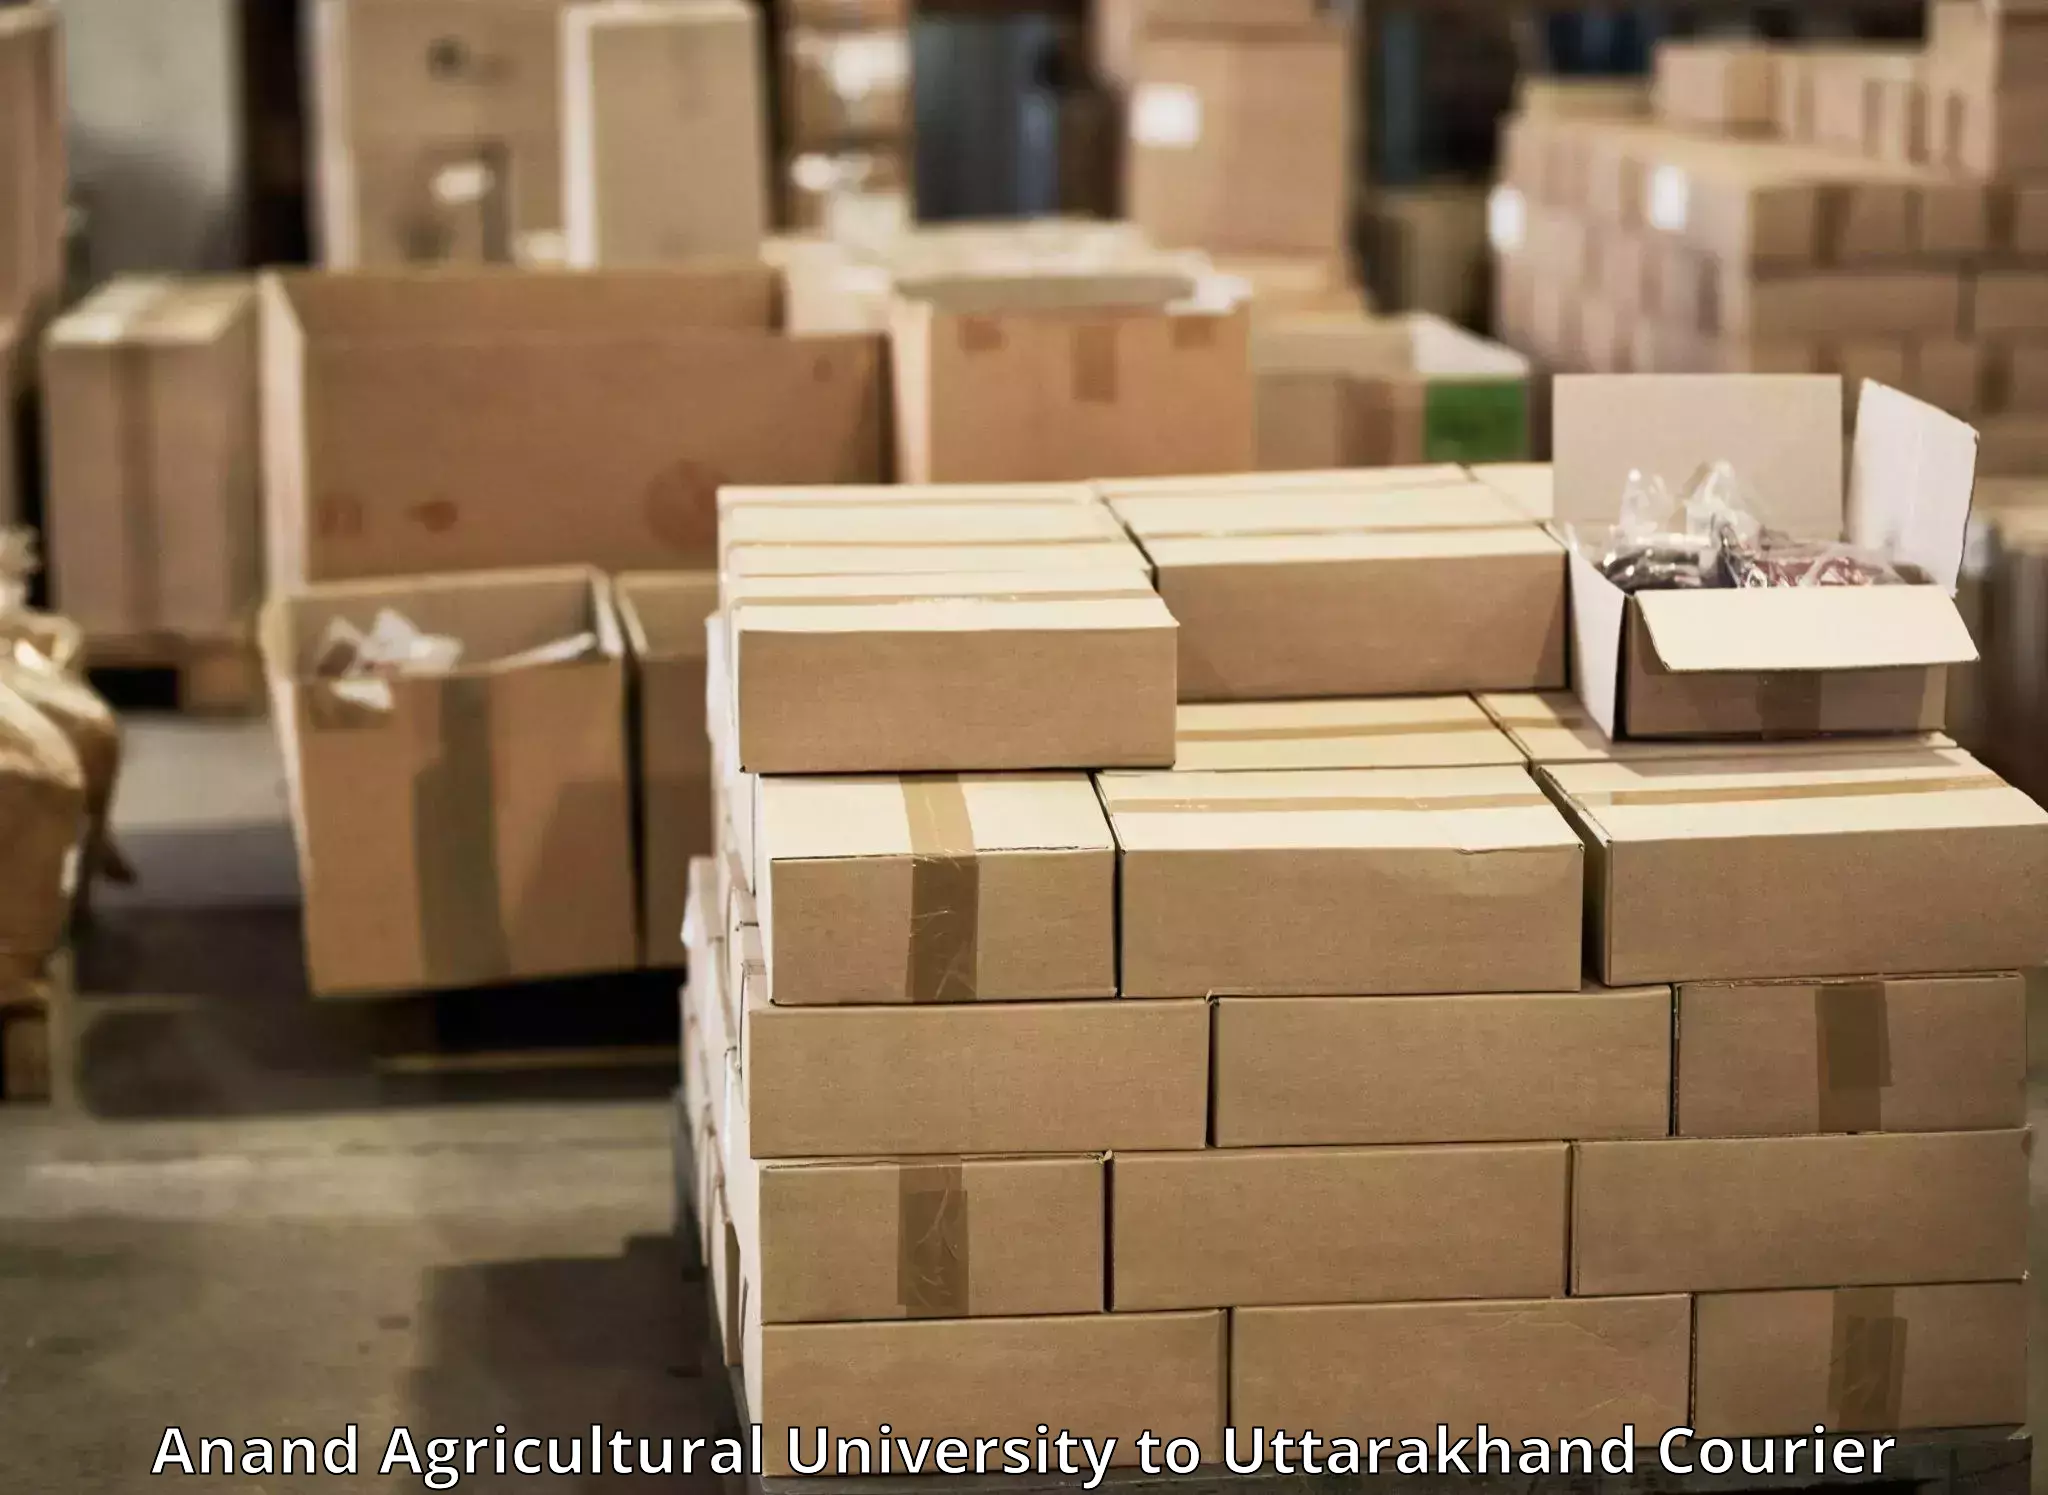 Multi-national courier services Anand Agricultural University to Baijnath Bageshwar